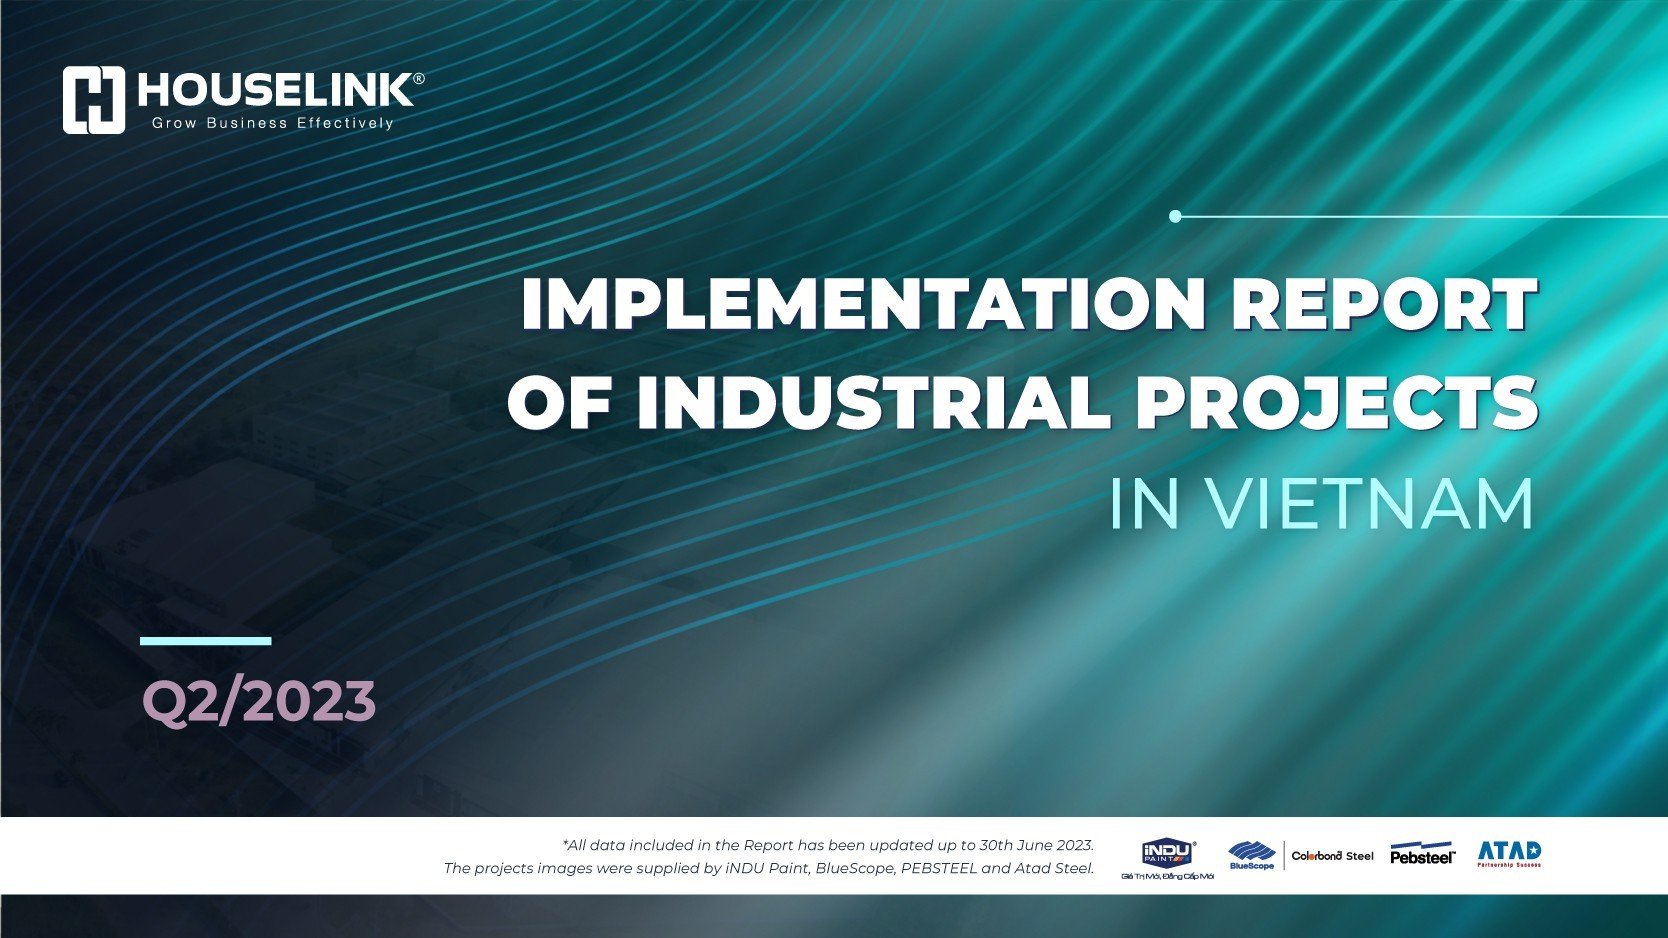 Implementation report of industrial projects in Vietnam Quarter 2/2023